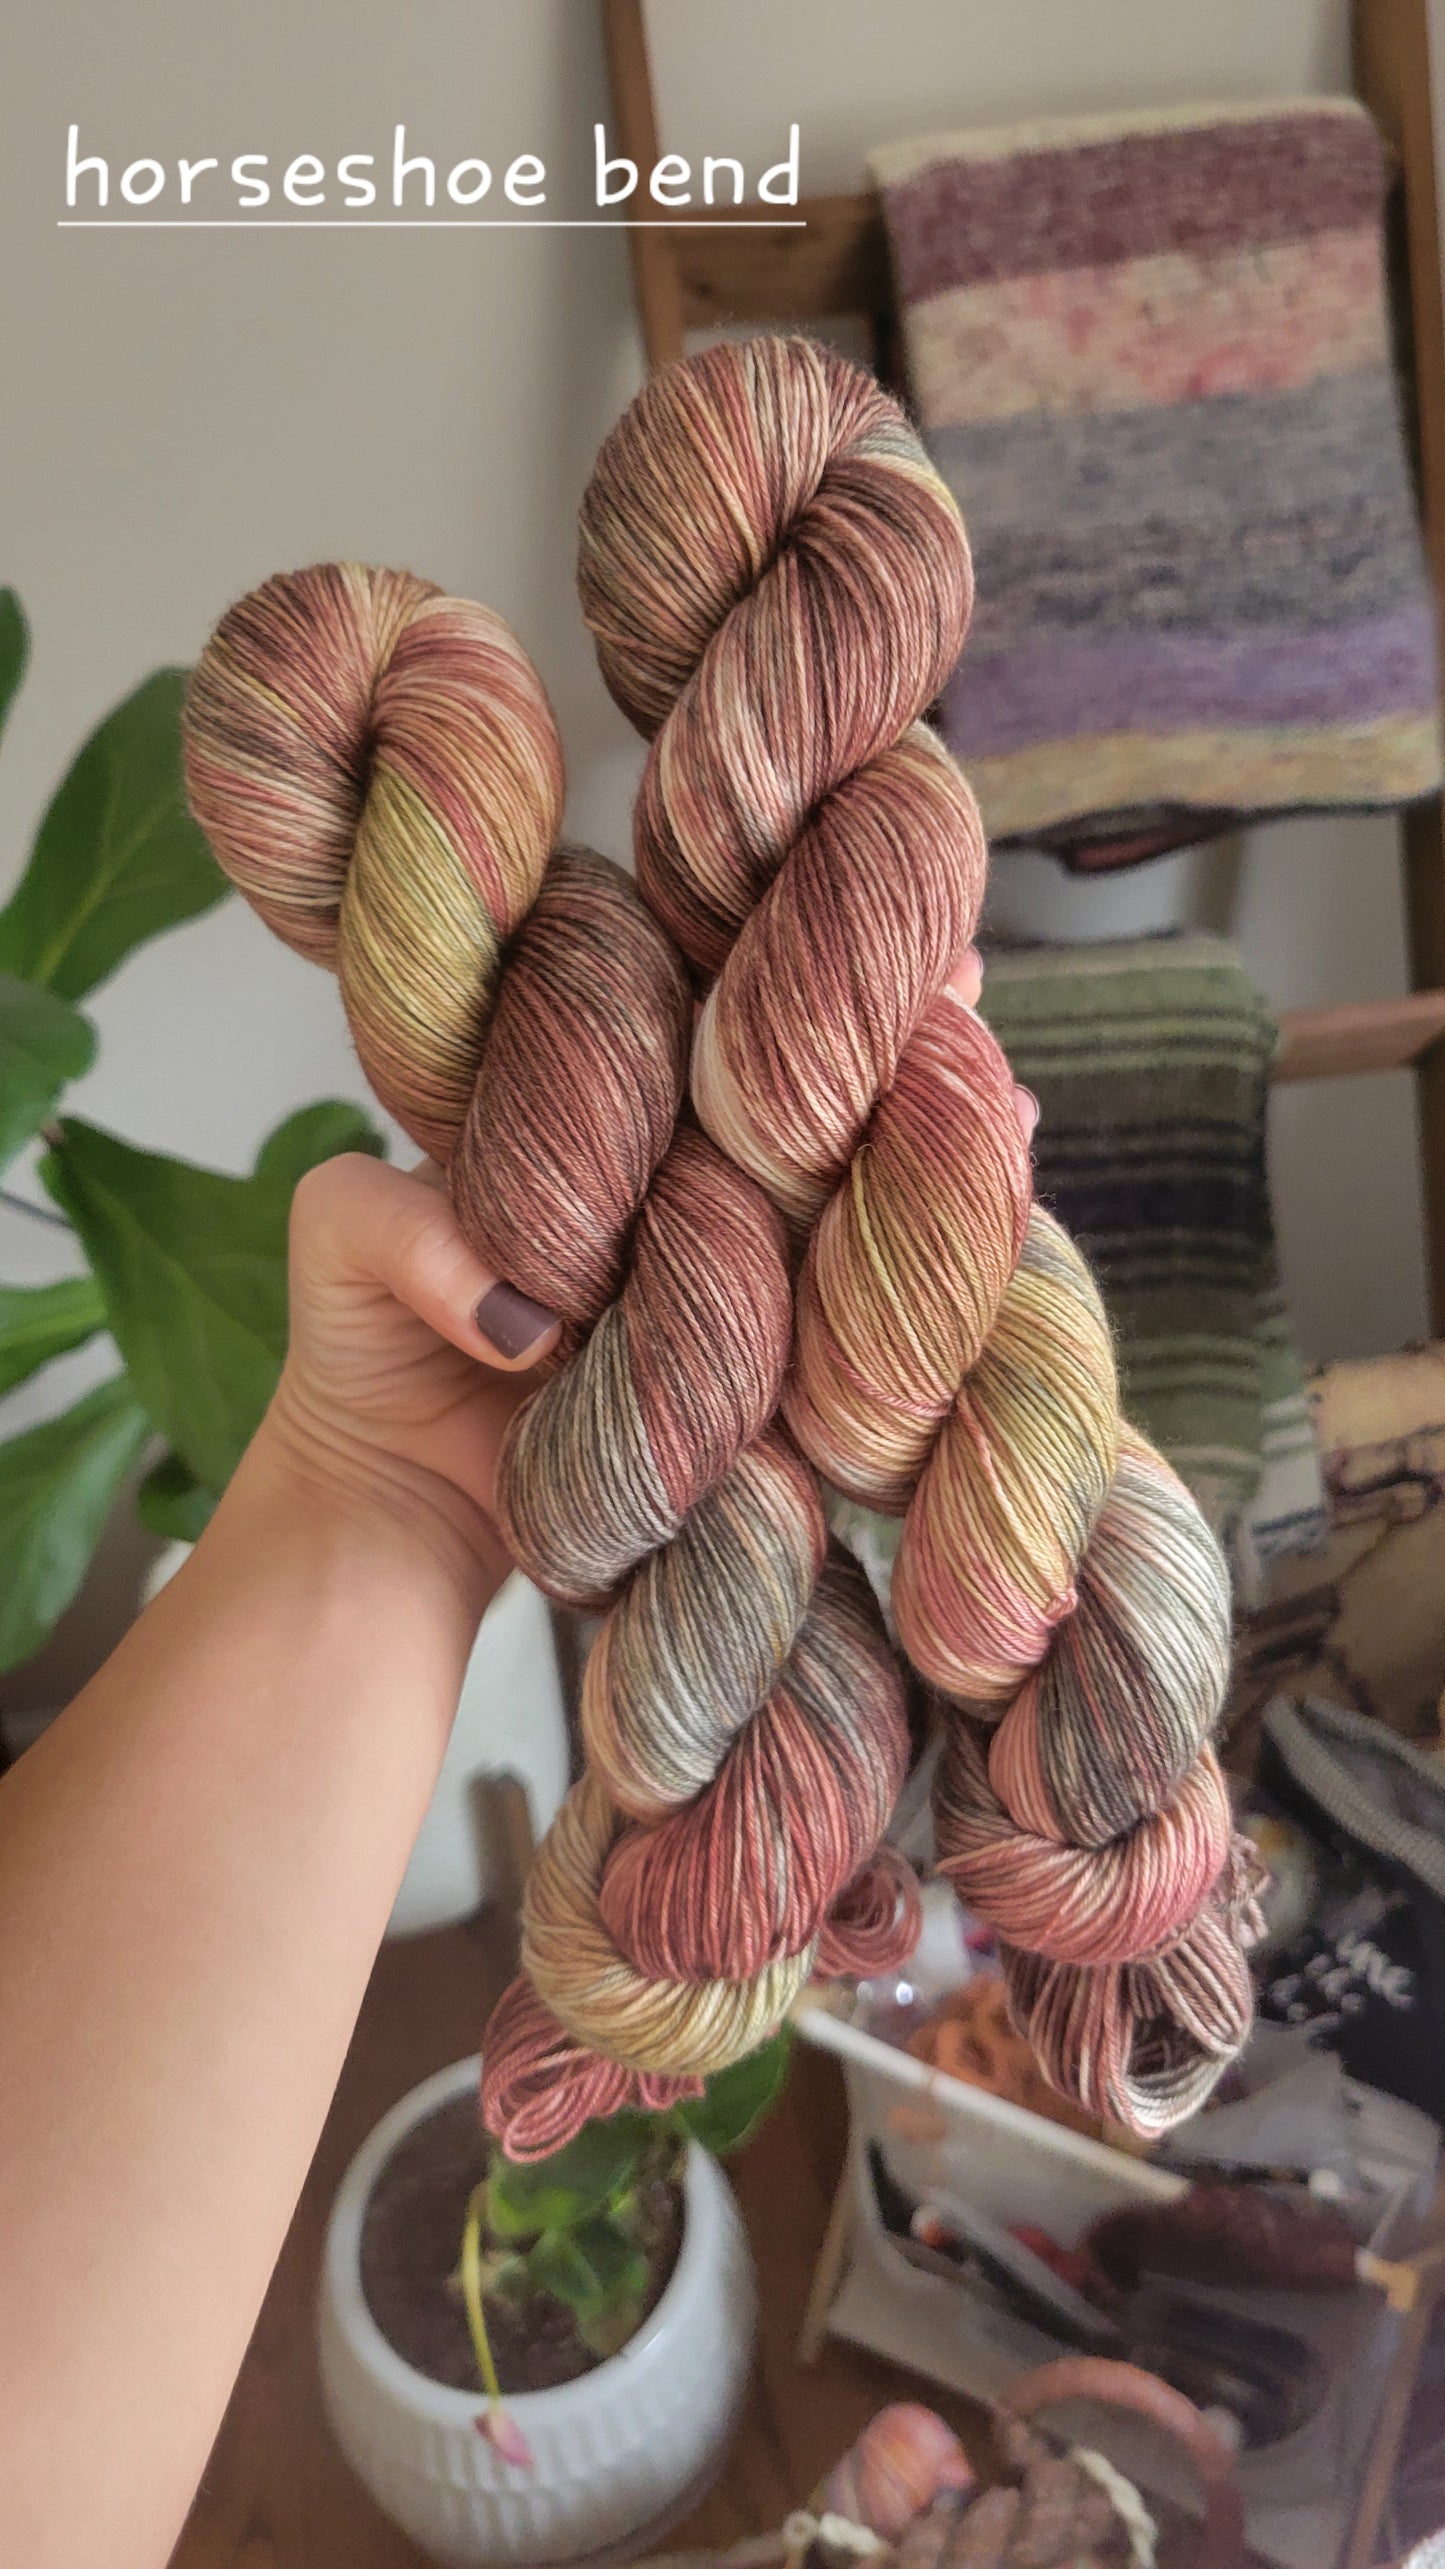 From the Open Road - Monthly Yarn Club